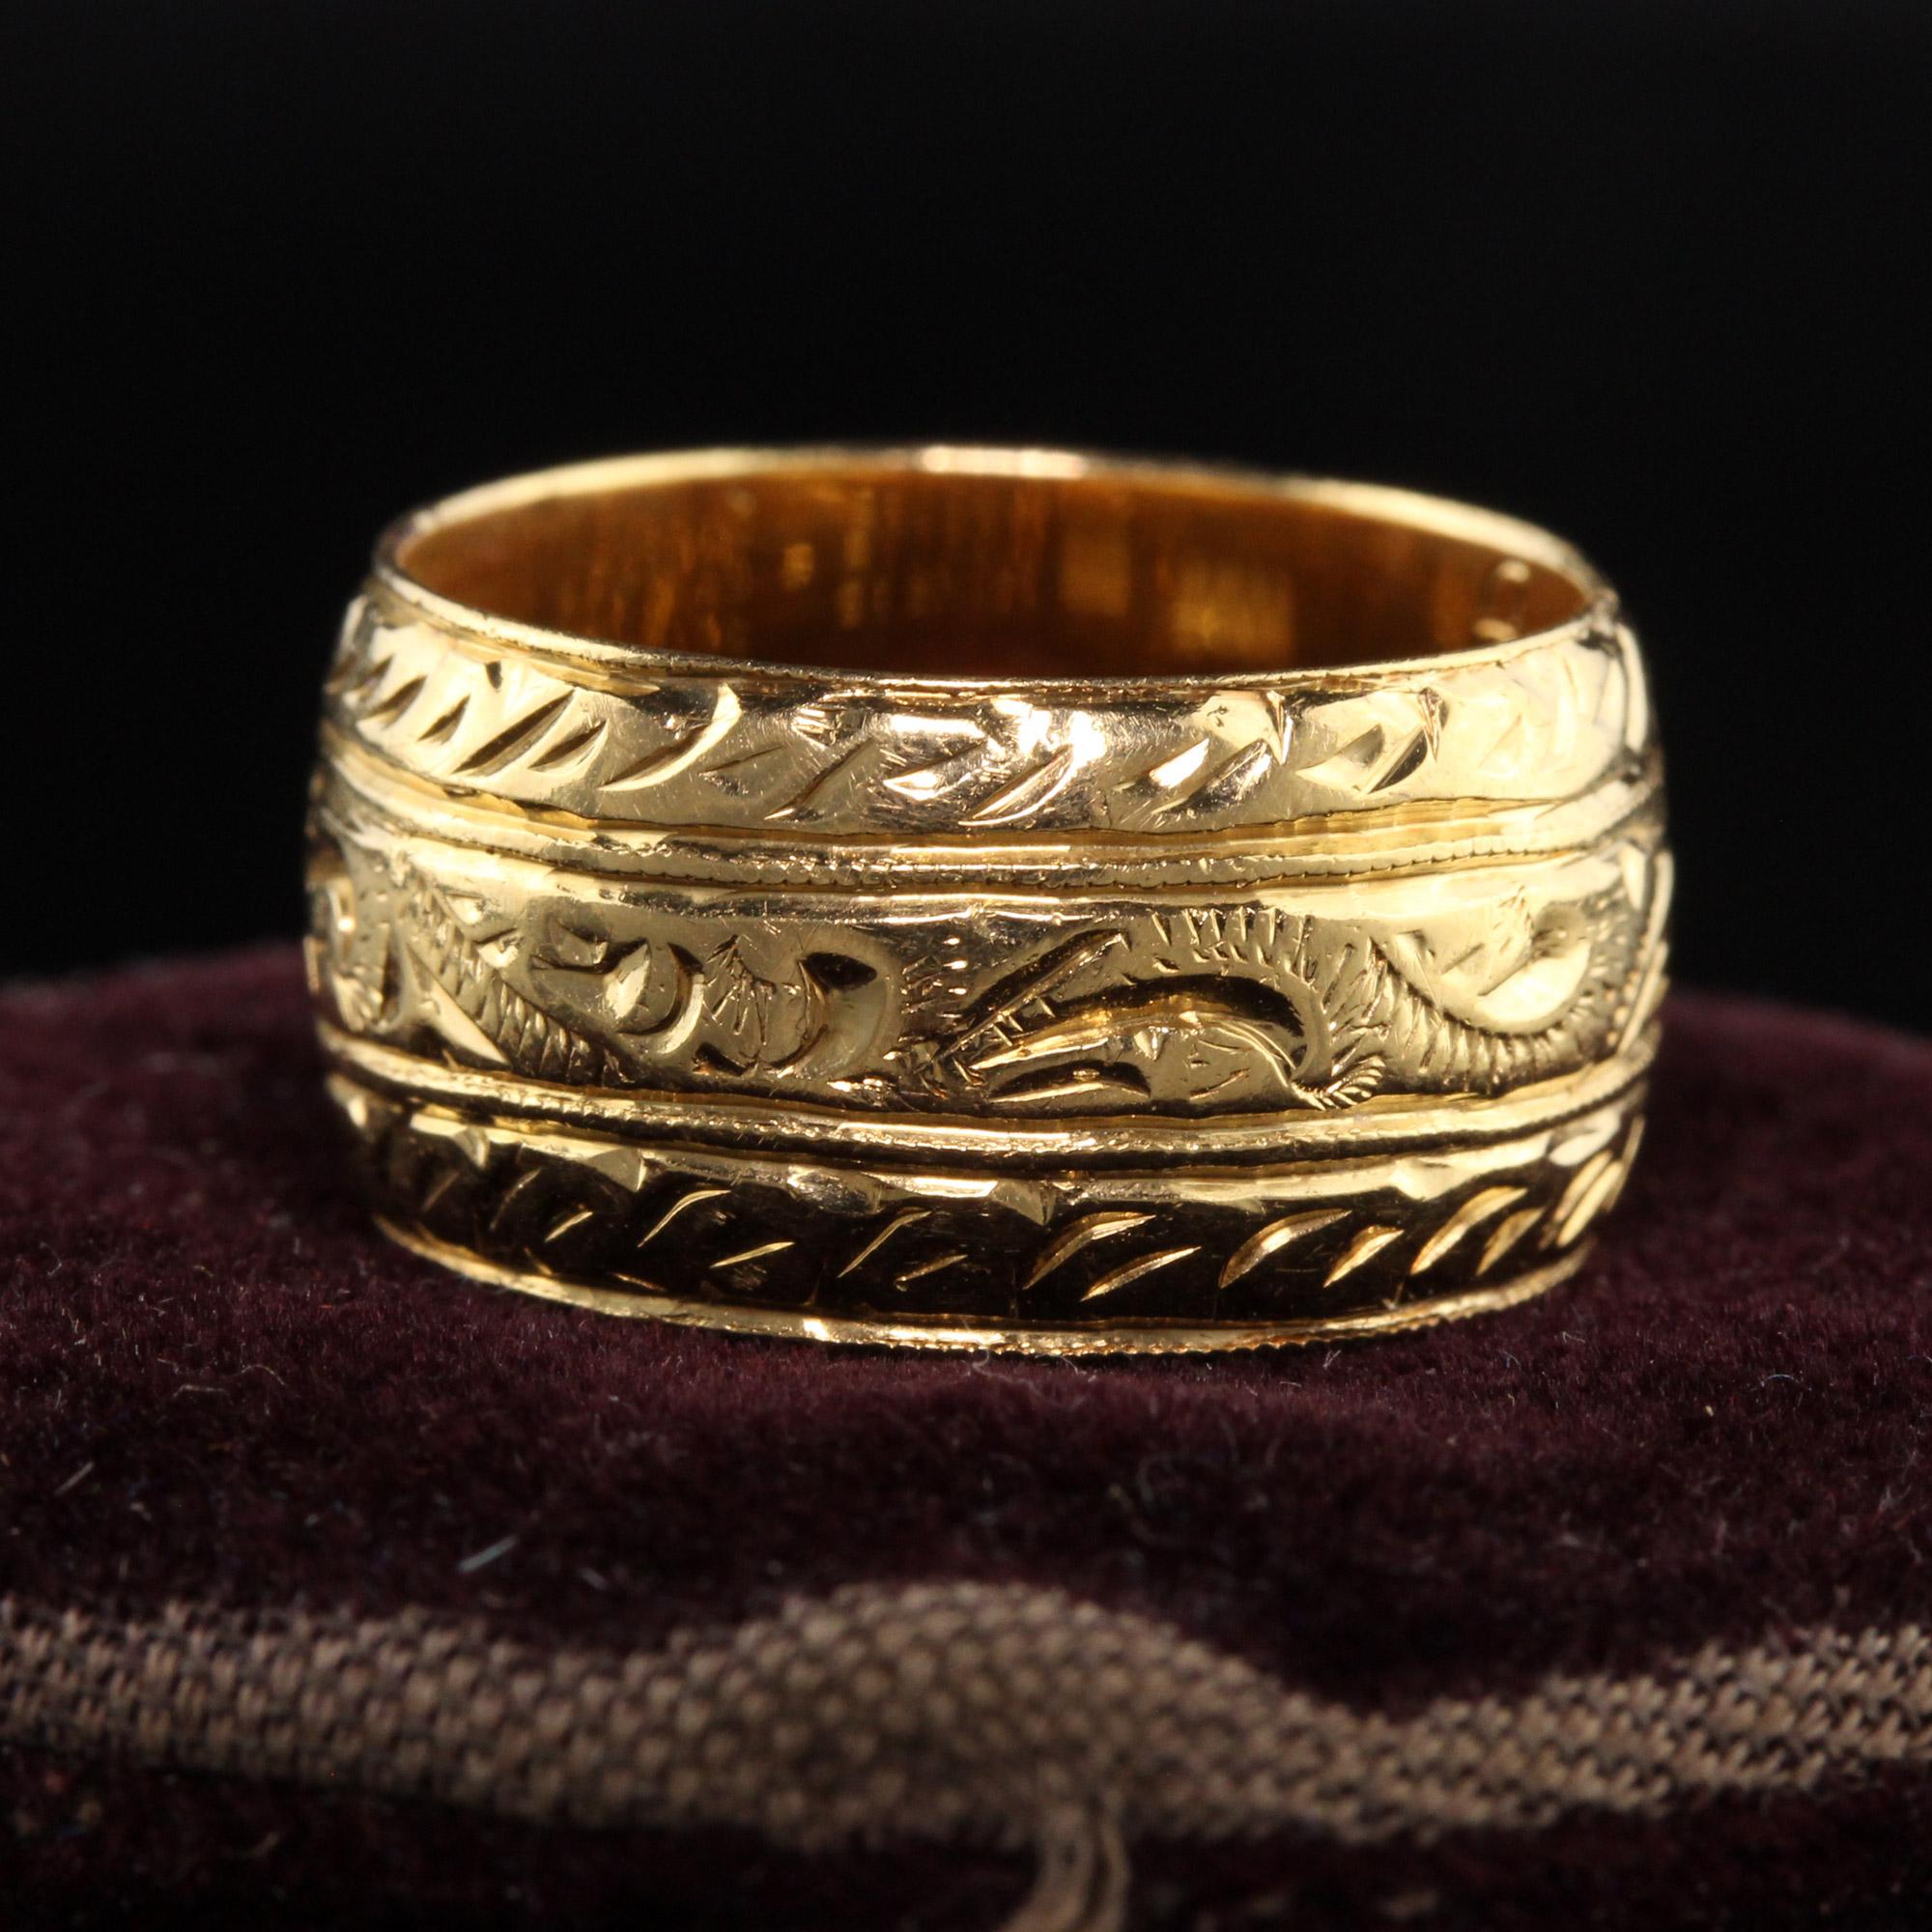 Beautiful Estate Vintage English 18K Yellow Gold Engraved Wide Wedding Band. This gorgeous engraved wedding band is wide and has beautiful engravings around the entire ring. It has english hallmarks inside the band and has 